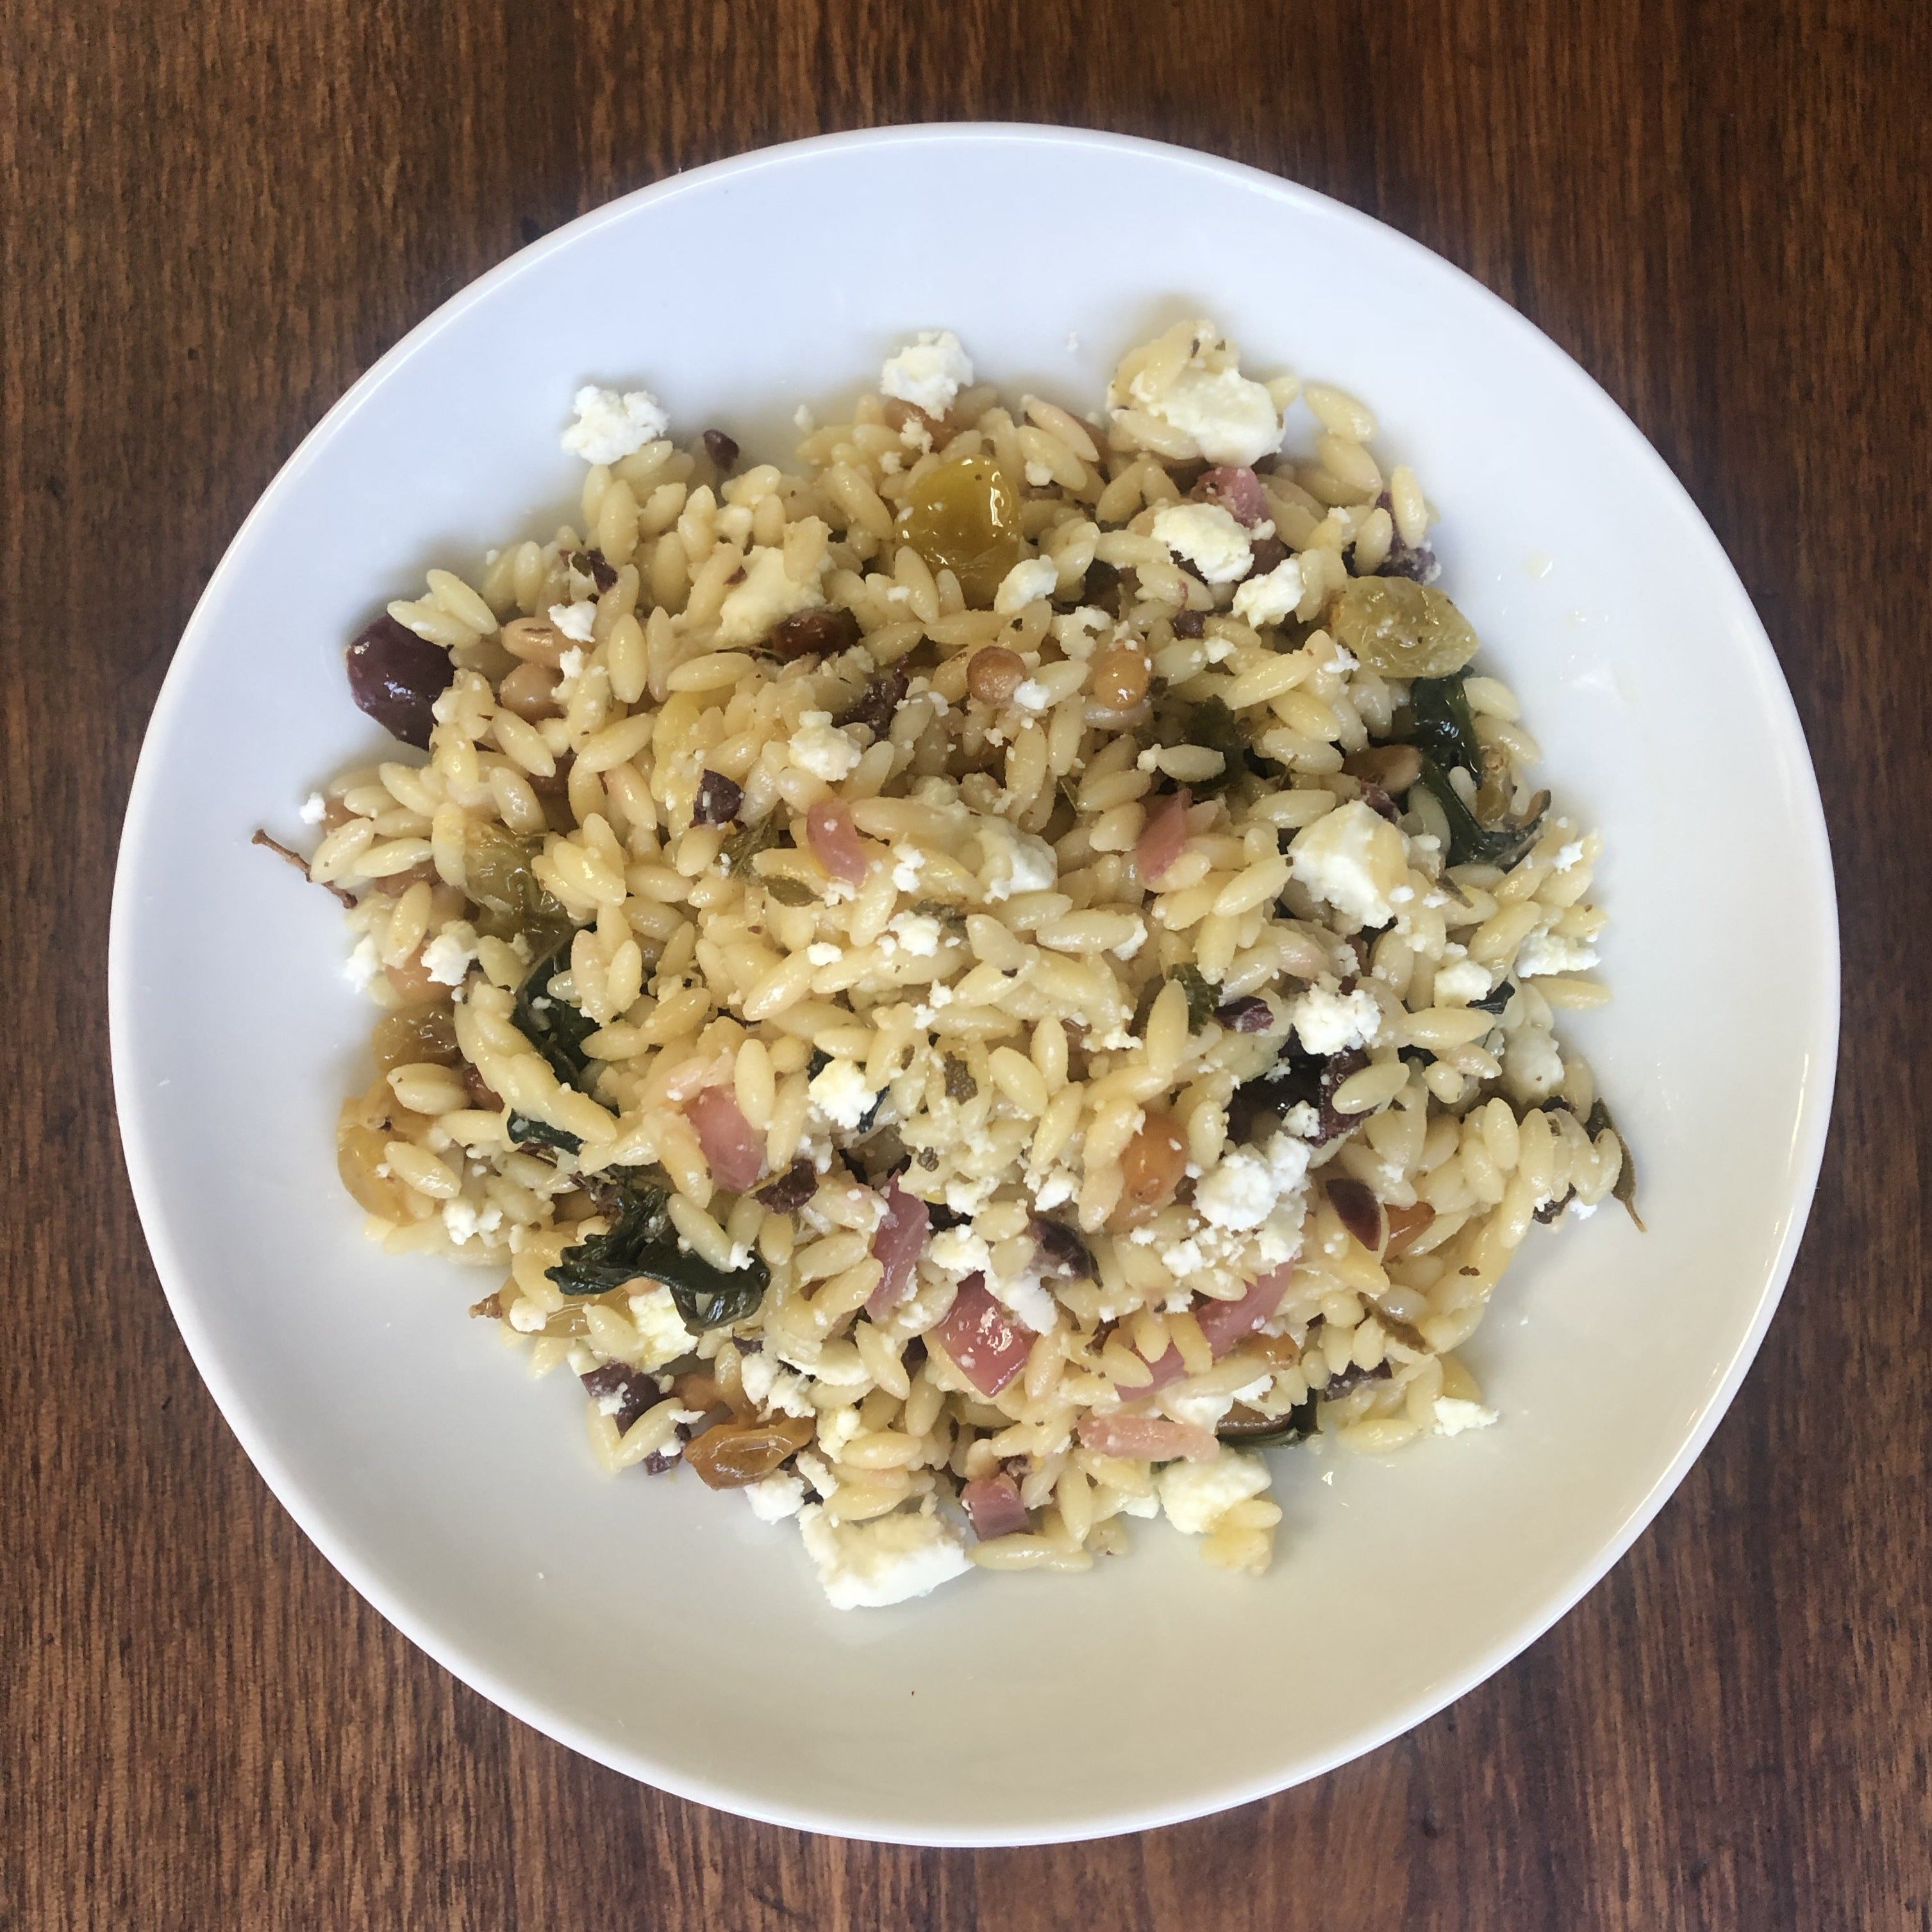 Farmshop, Orzo Pasta Salad with Olives, Pickled Red Onions, Pine Nuts & Goats' Milk Feta, 8 oz